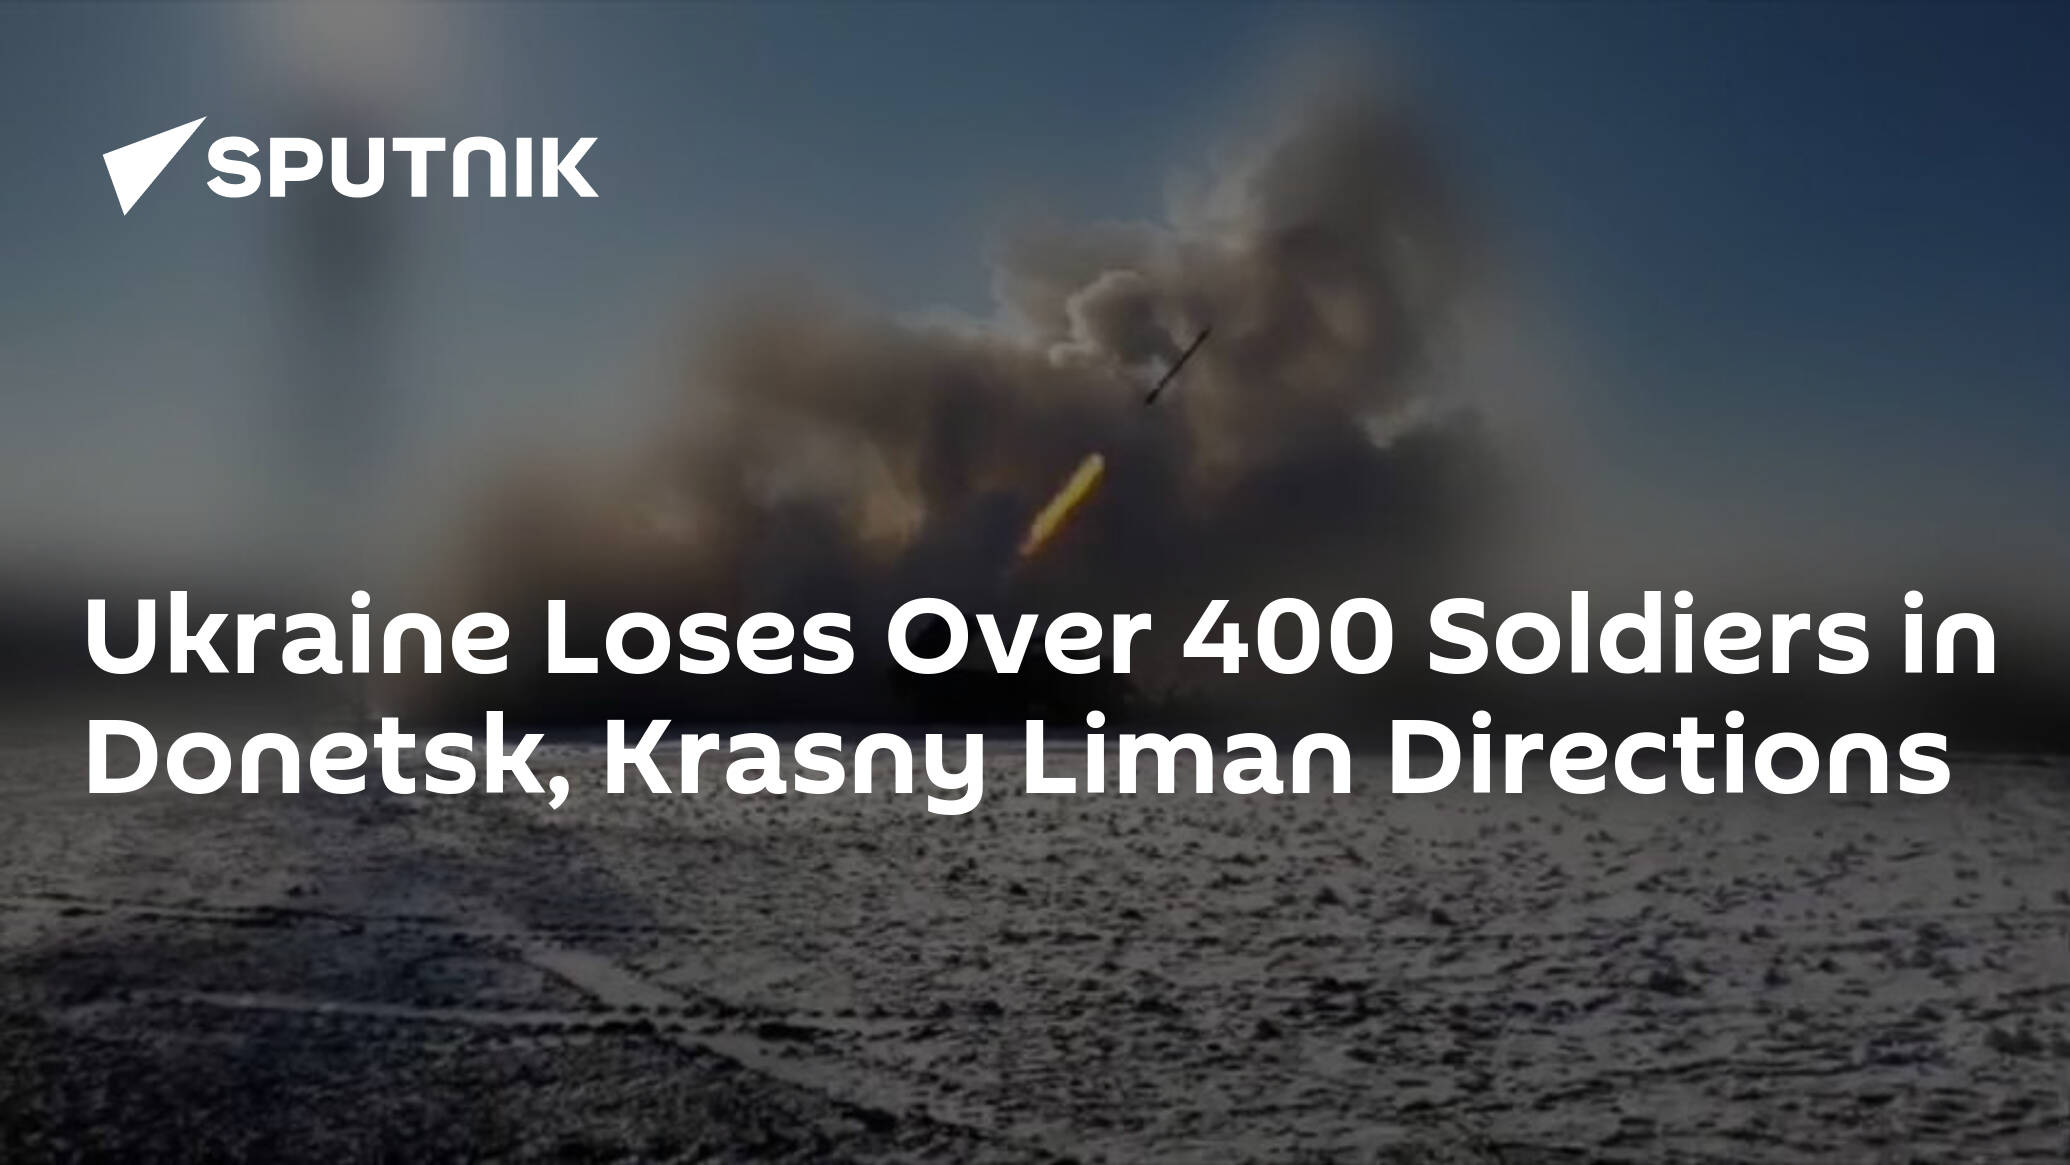 Ukraine Loses Over 400 Soldiers in Donetsk, Krasny Liman Directions